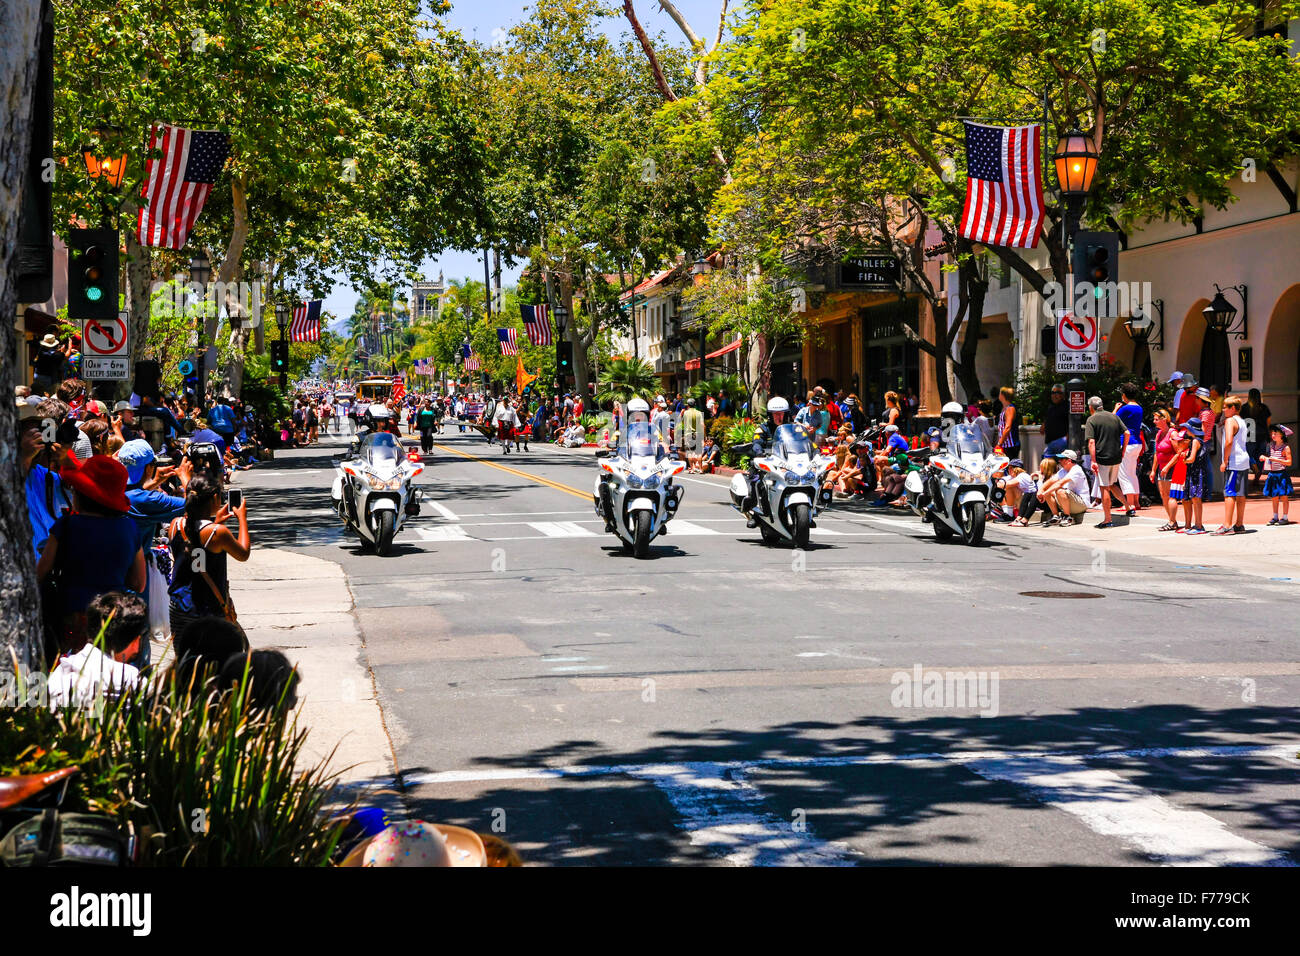 Californian Police motorcyclists lead the July 4th parade down State